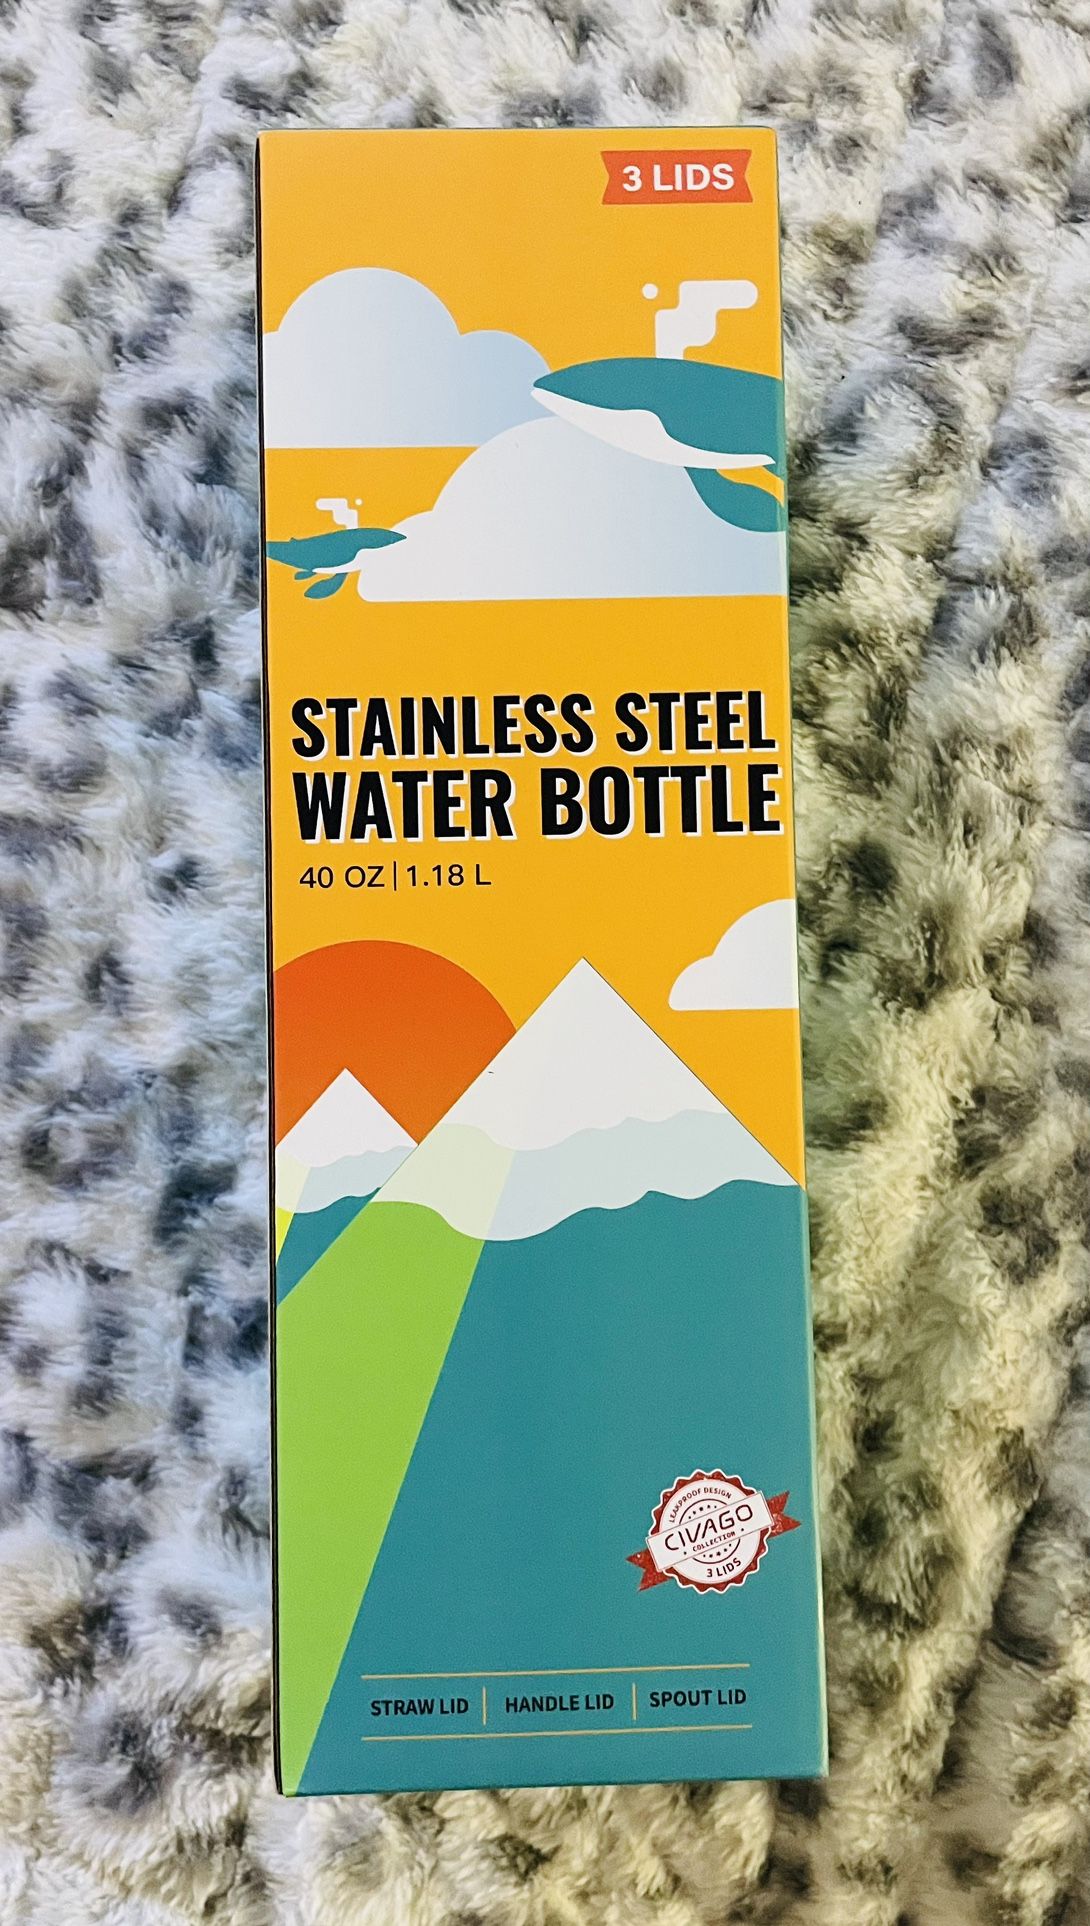 Stainless Steal Water Bottle 